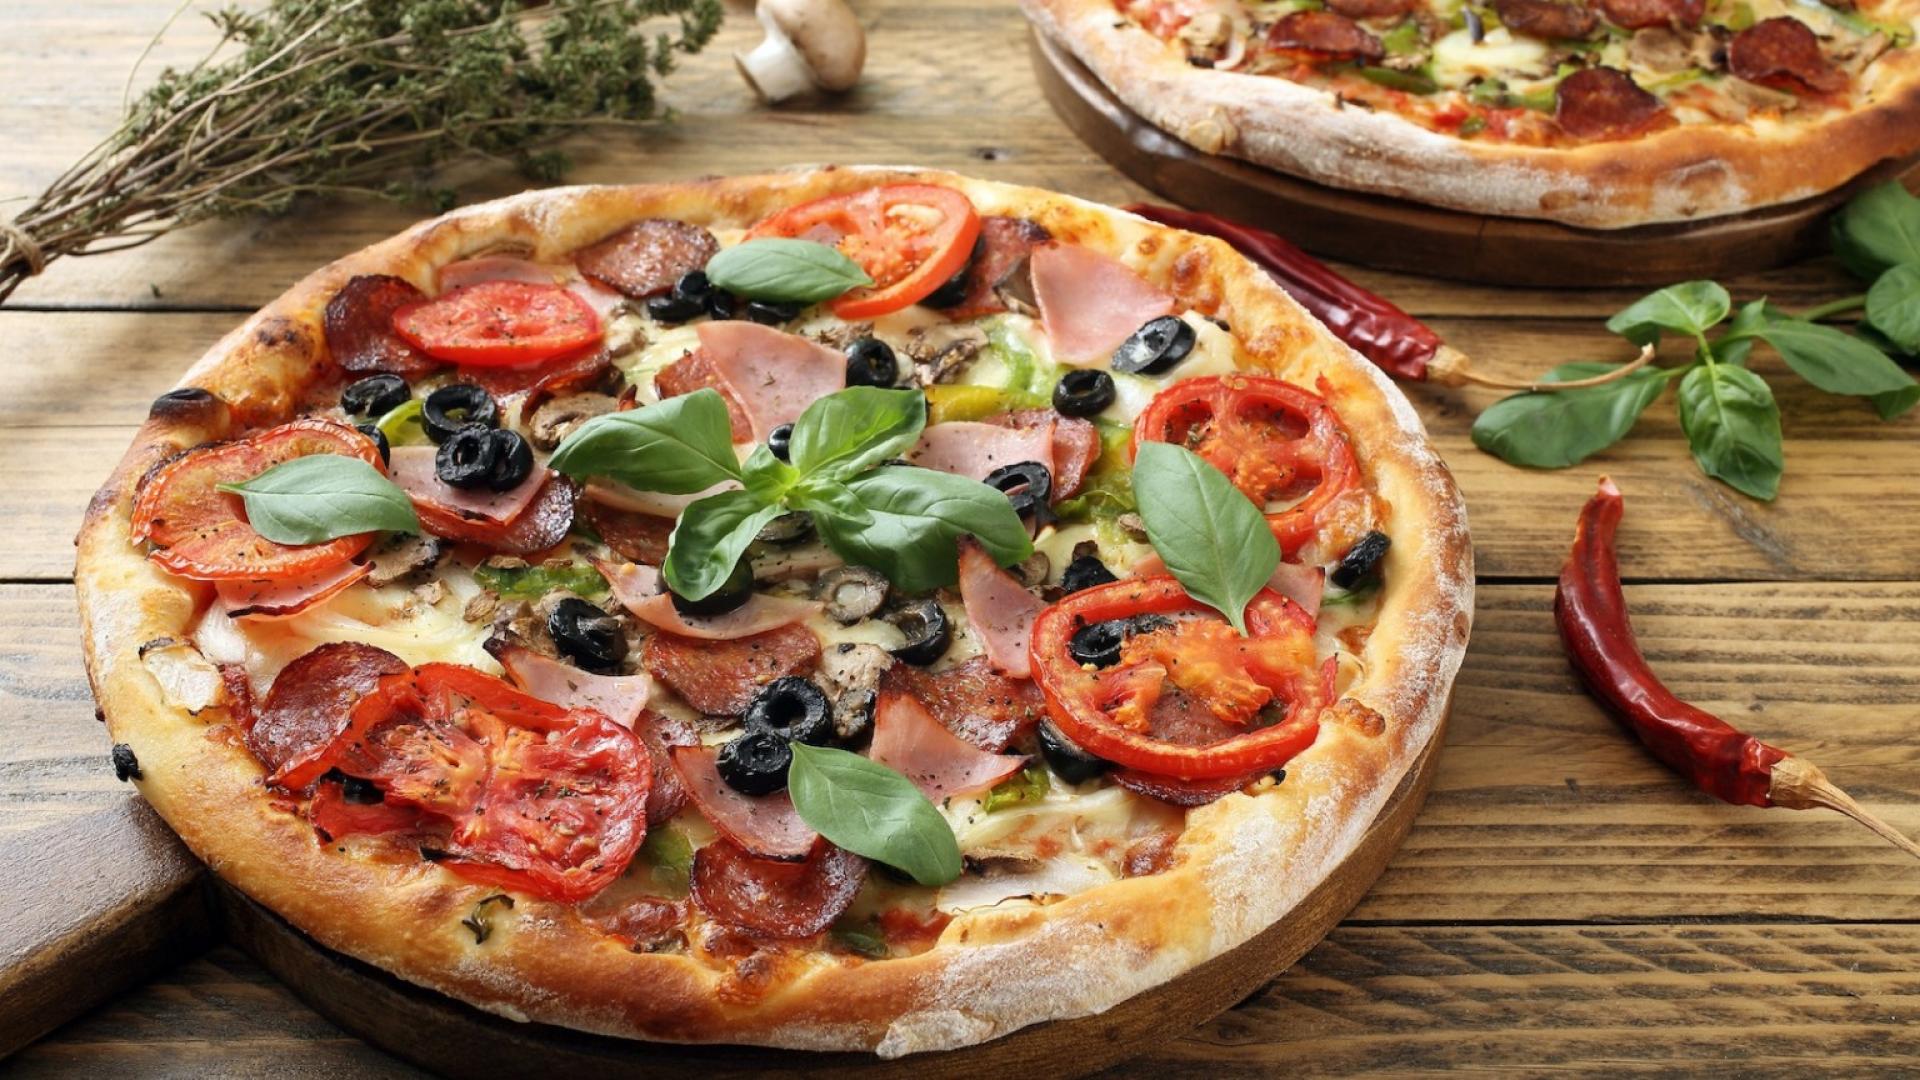 PLANETE PIZZA & FOODS